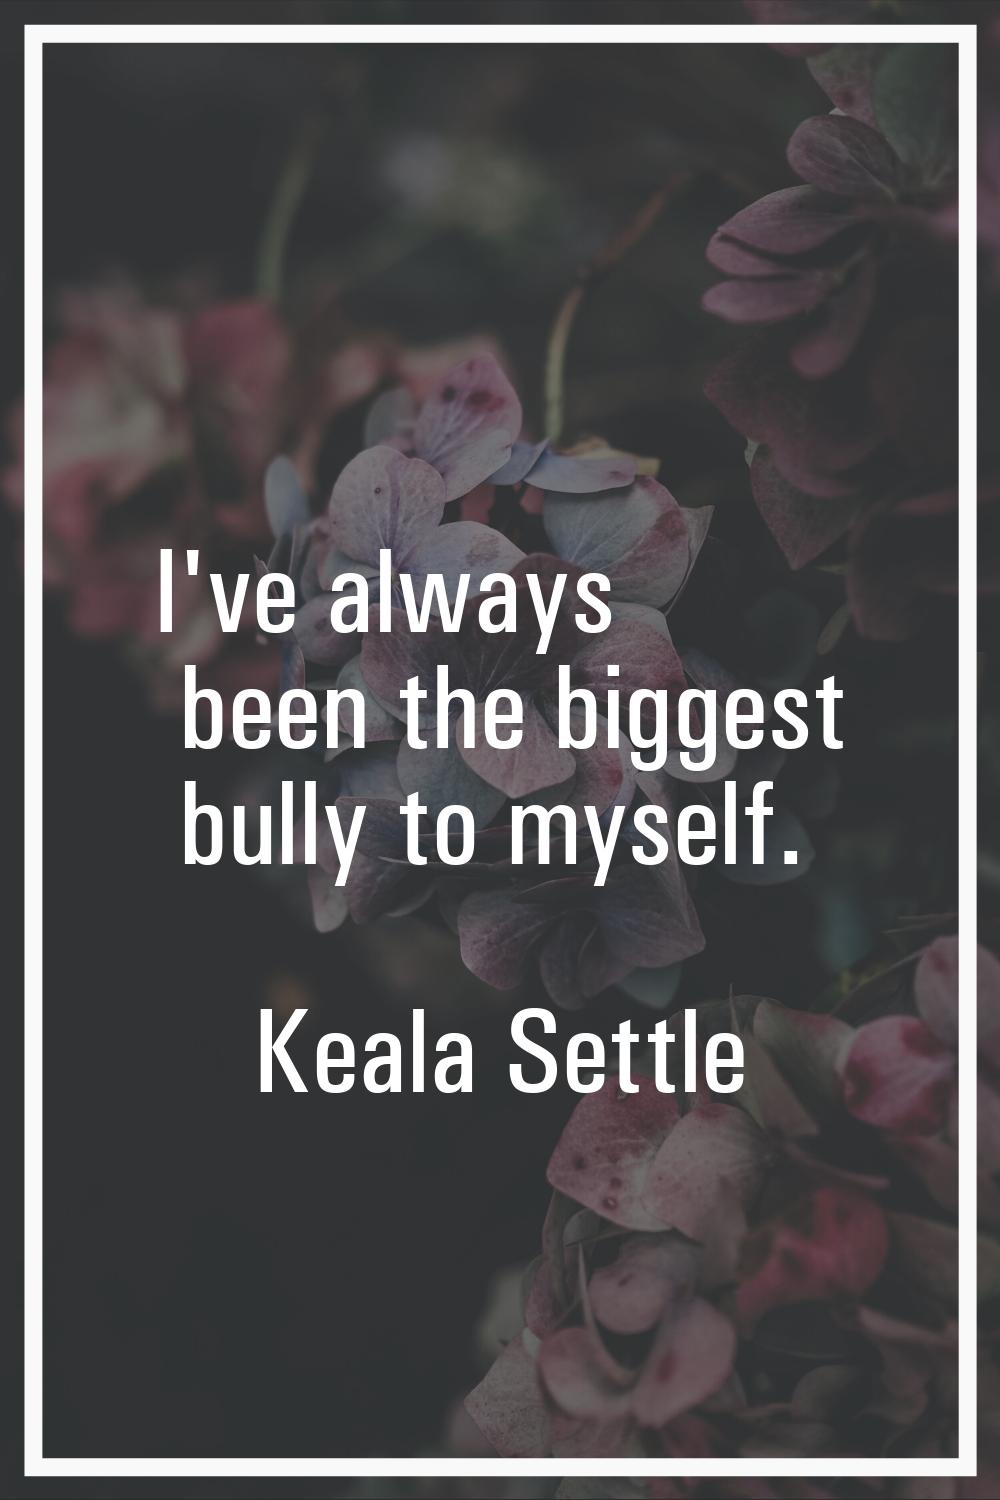 I've always been the biggest bully to myself.